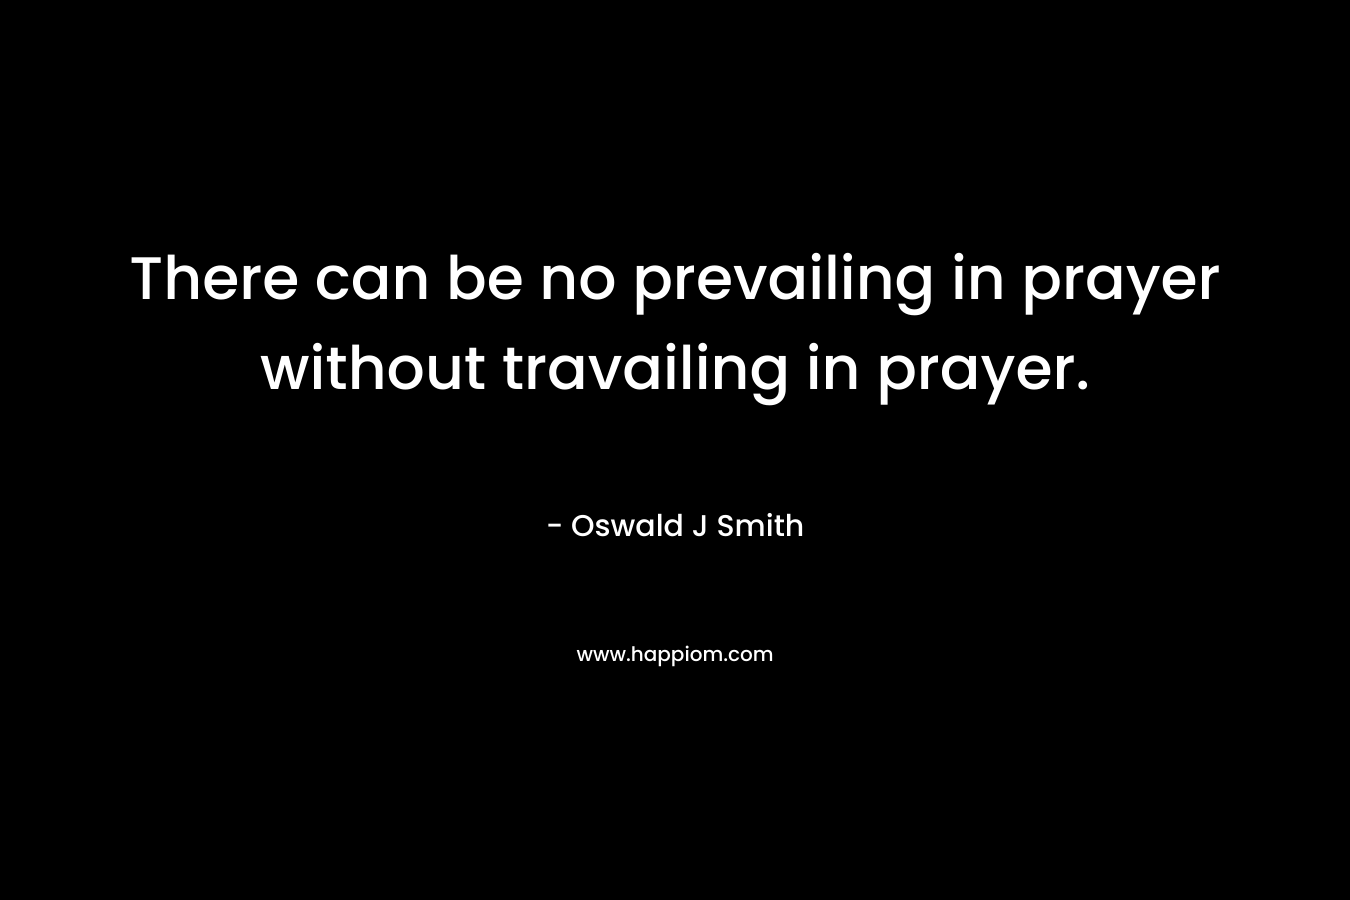 There can be no prevailing in prayer without travailing in prayer.